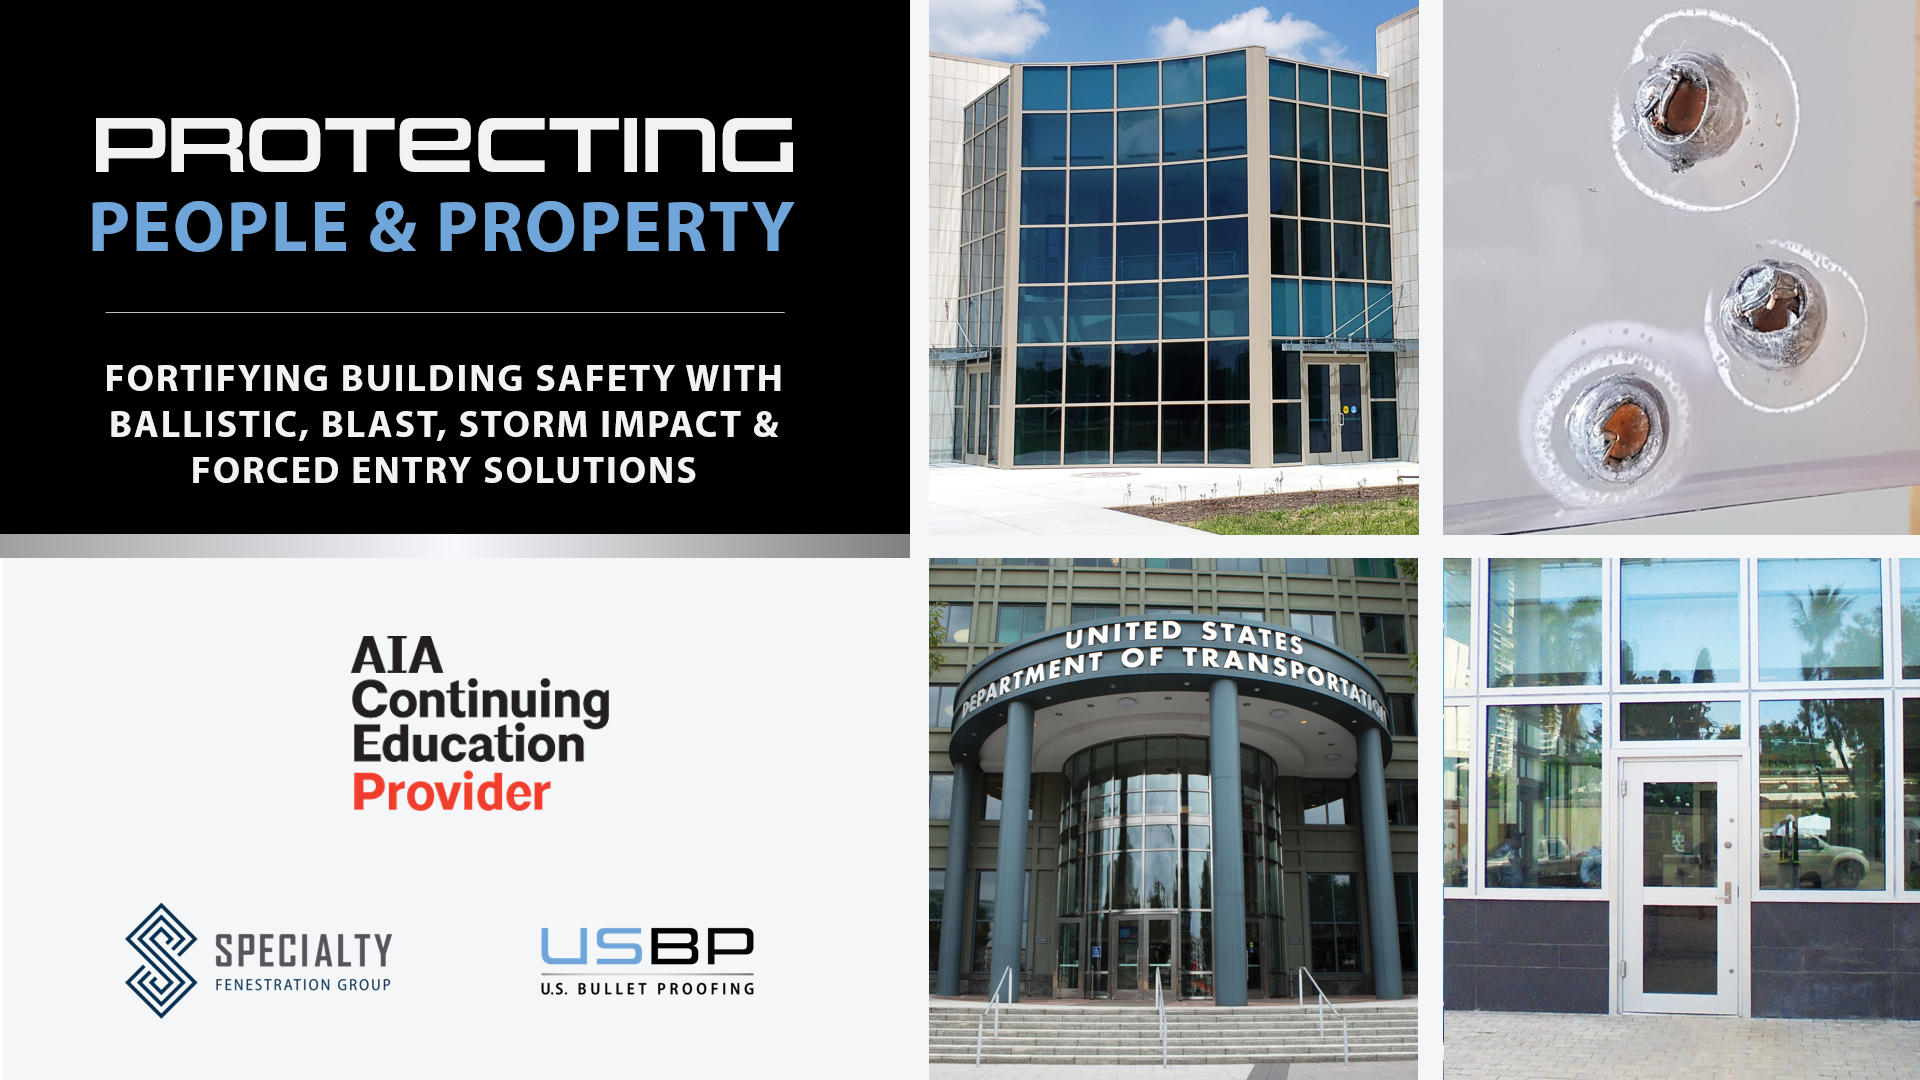 In-Person Lunch & Learn – RB&A: Austin, TX – CEU Course: Protecting People & Property